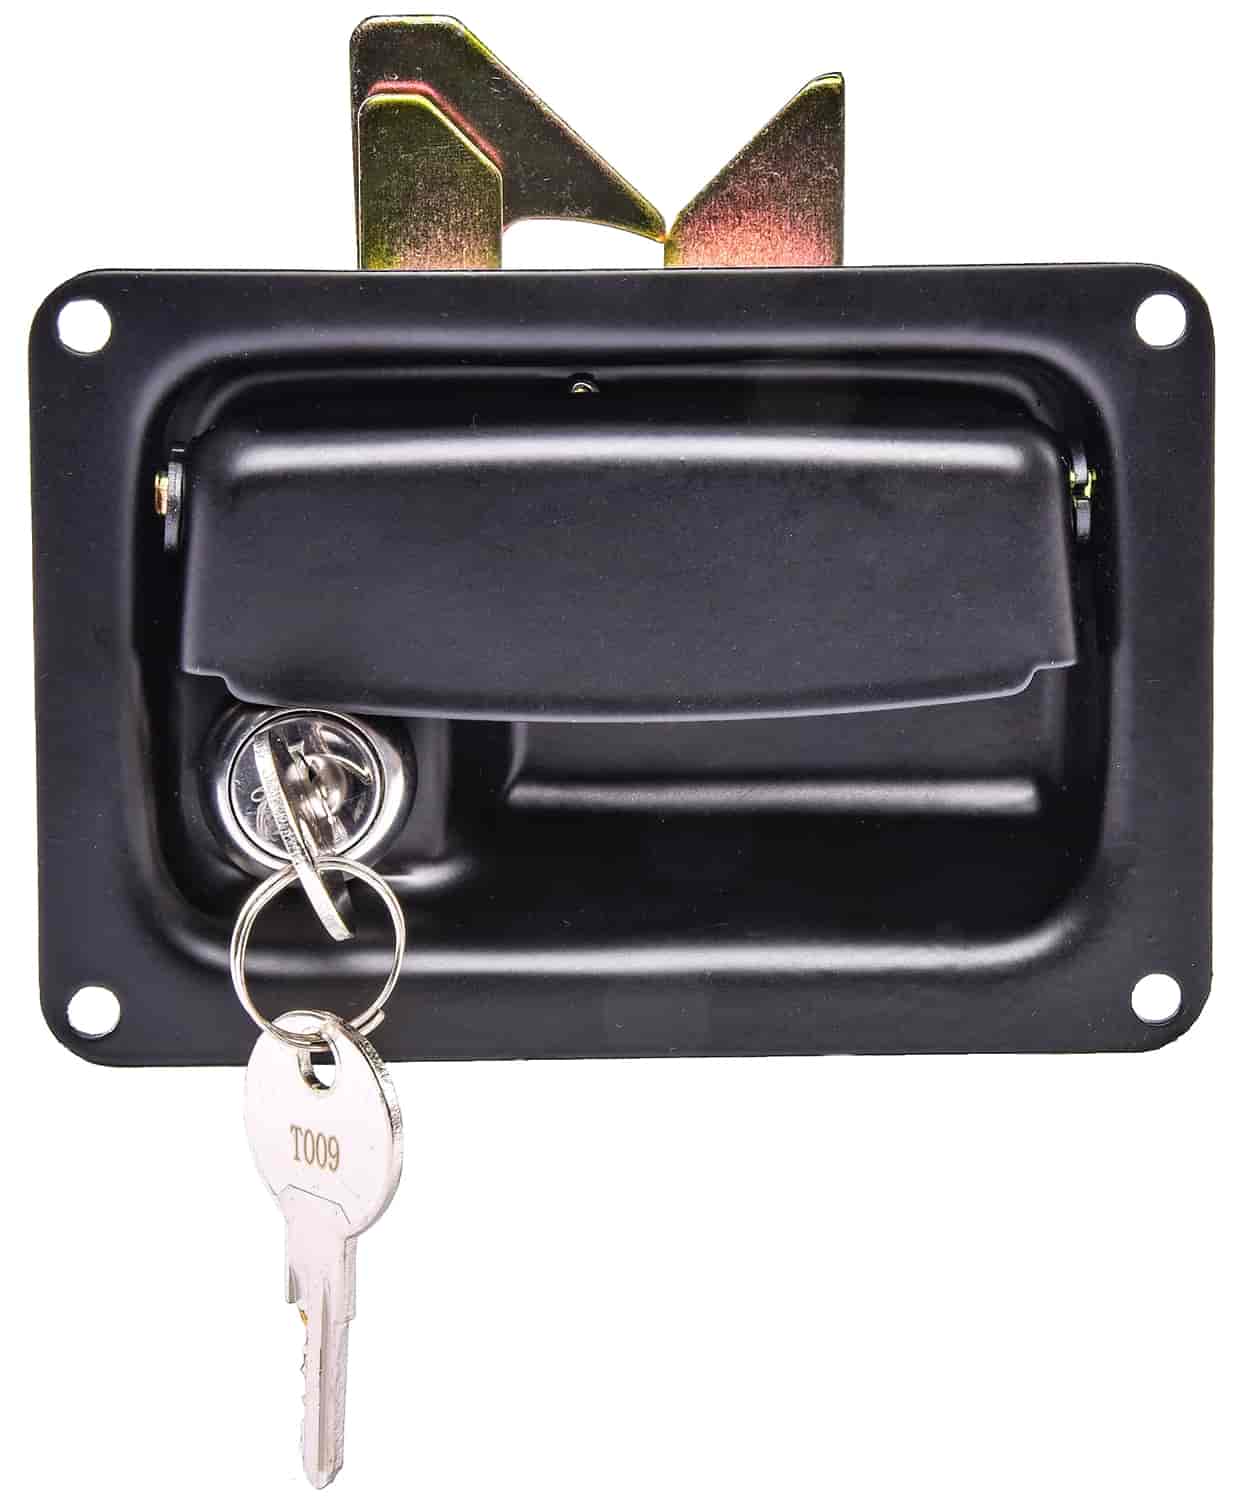 Replacement Latch for Tool Box [Black]